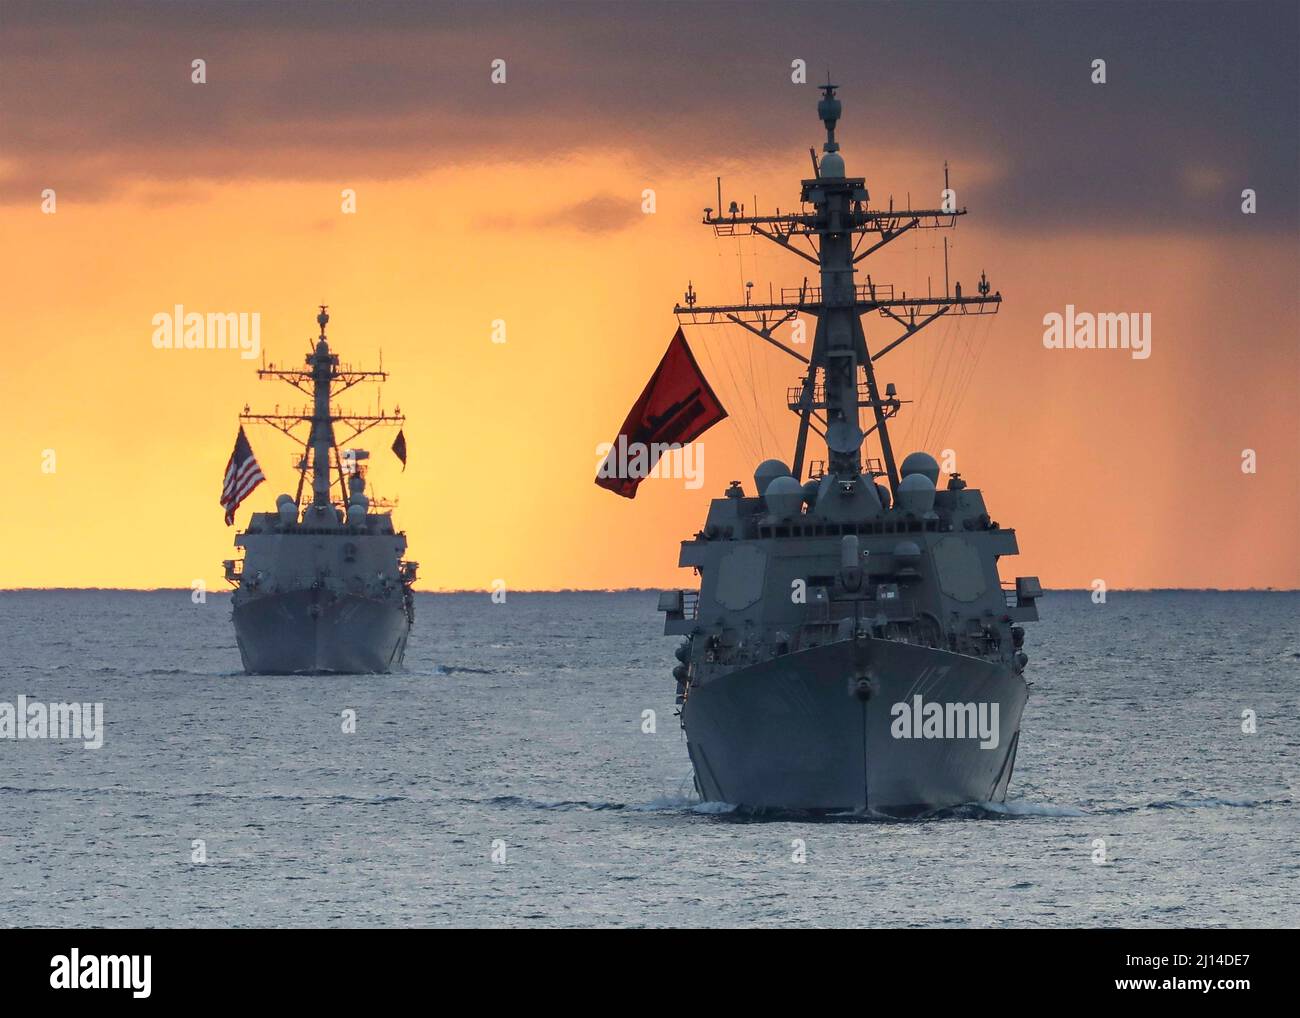 Atlantic Ocean, United States. 15 March, 2022. The U.S. Navy Arleigh-burke class guided-missile destroyers USS Paul Ignatius, right, and the USS Nitze sail in formation at sunset, March 15, 2022 in the Atlantic Ocean.  Credit: MC1 Eric Coffer/Planetpix/Alamy Live News Stock Photo